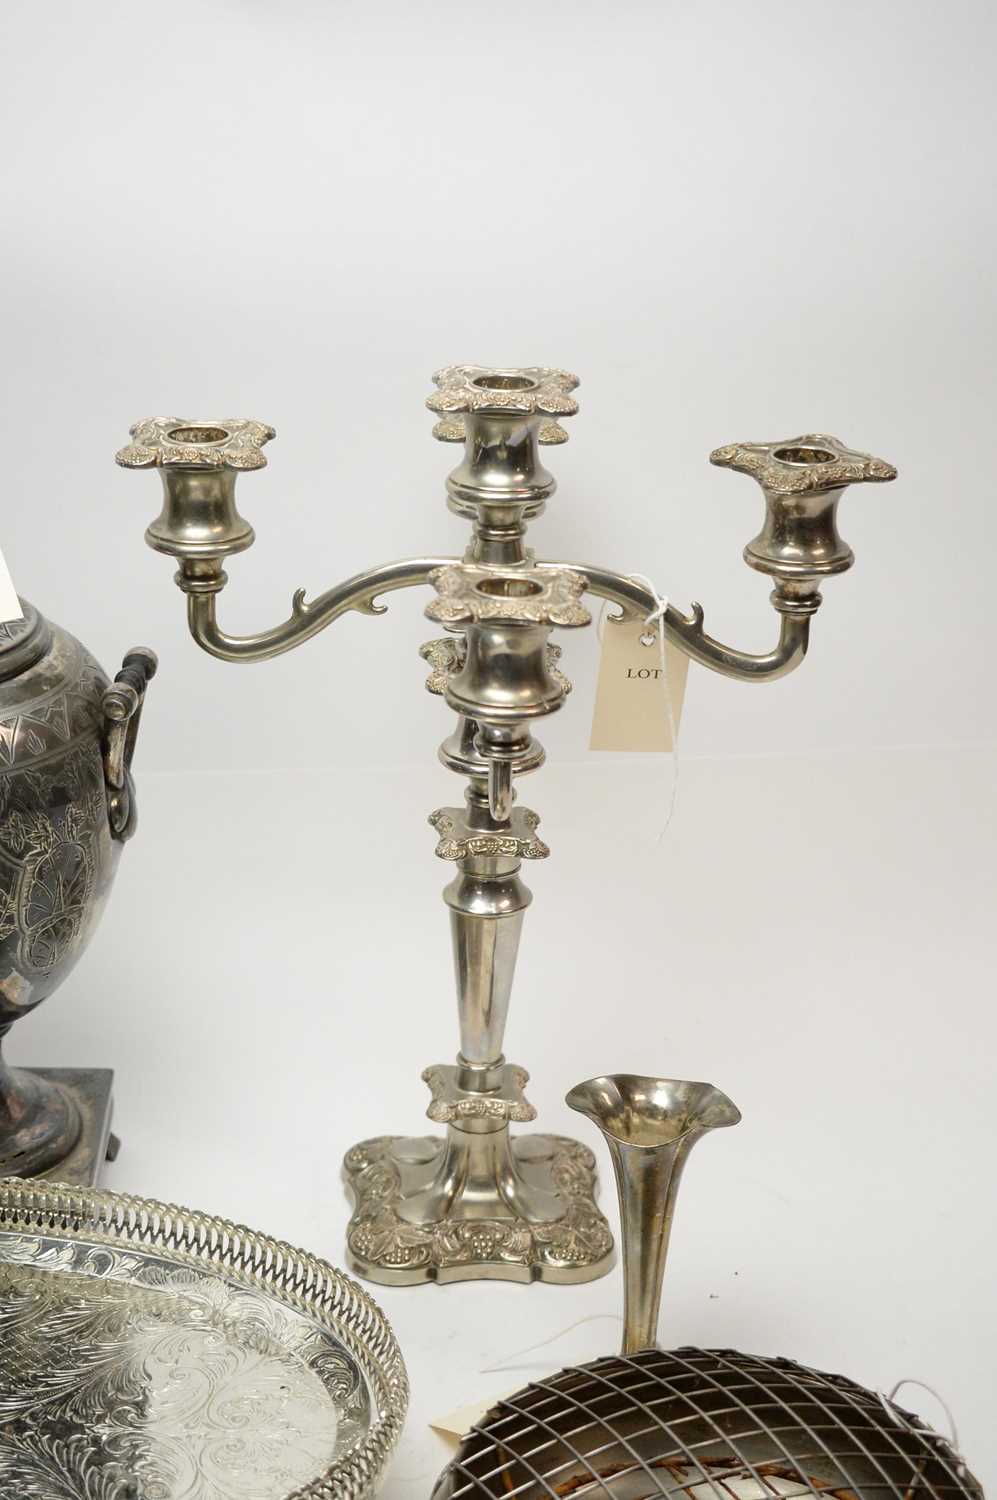 Antique silver-plated items including a Victorian tea urn. - Image 2 of 6